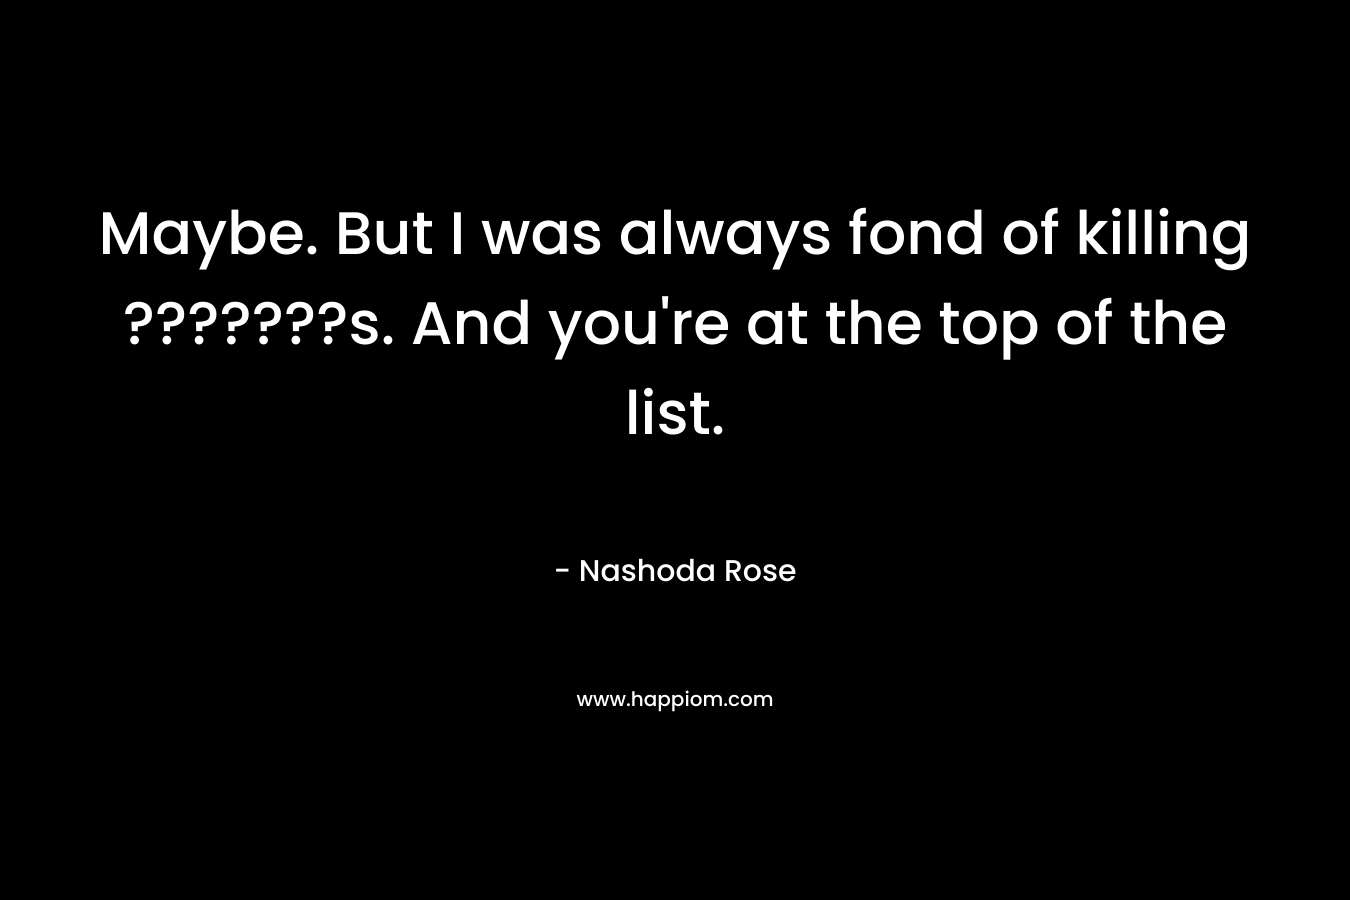 Maybe. But I was always fond of killing ???????s. And you’re at the top of the list. – Nashoda Rose